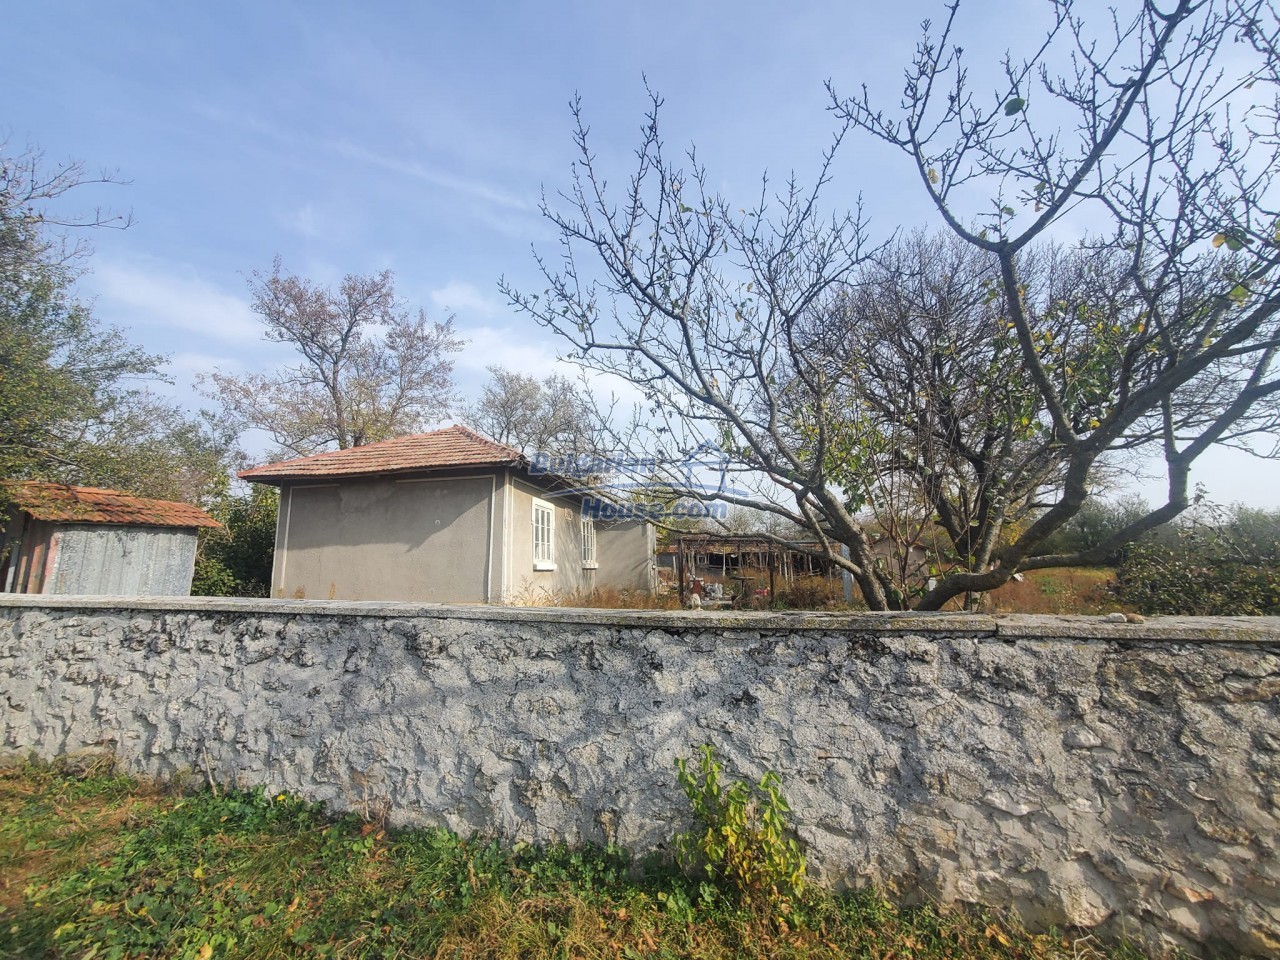 13638:1 -  Traditional village house in the village near KAVARNA